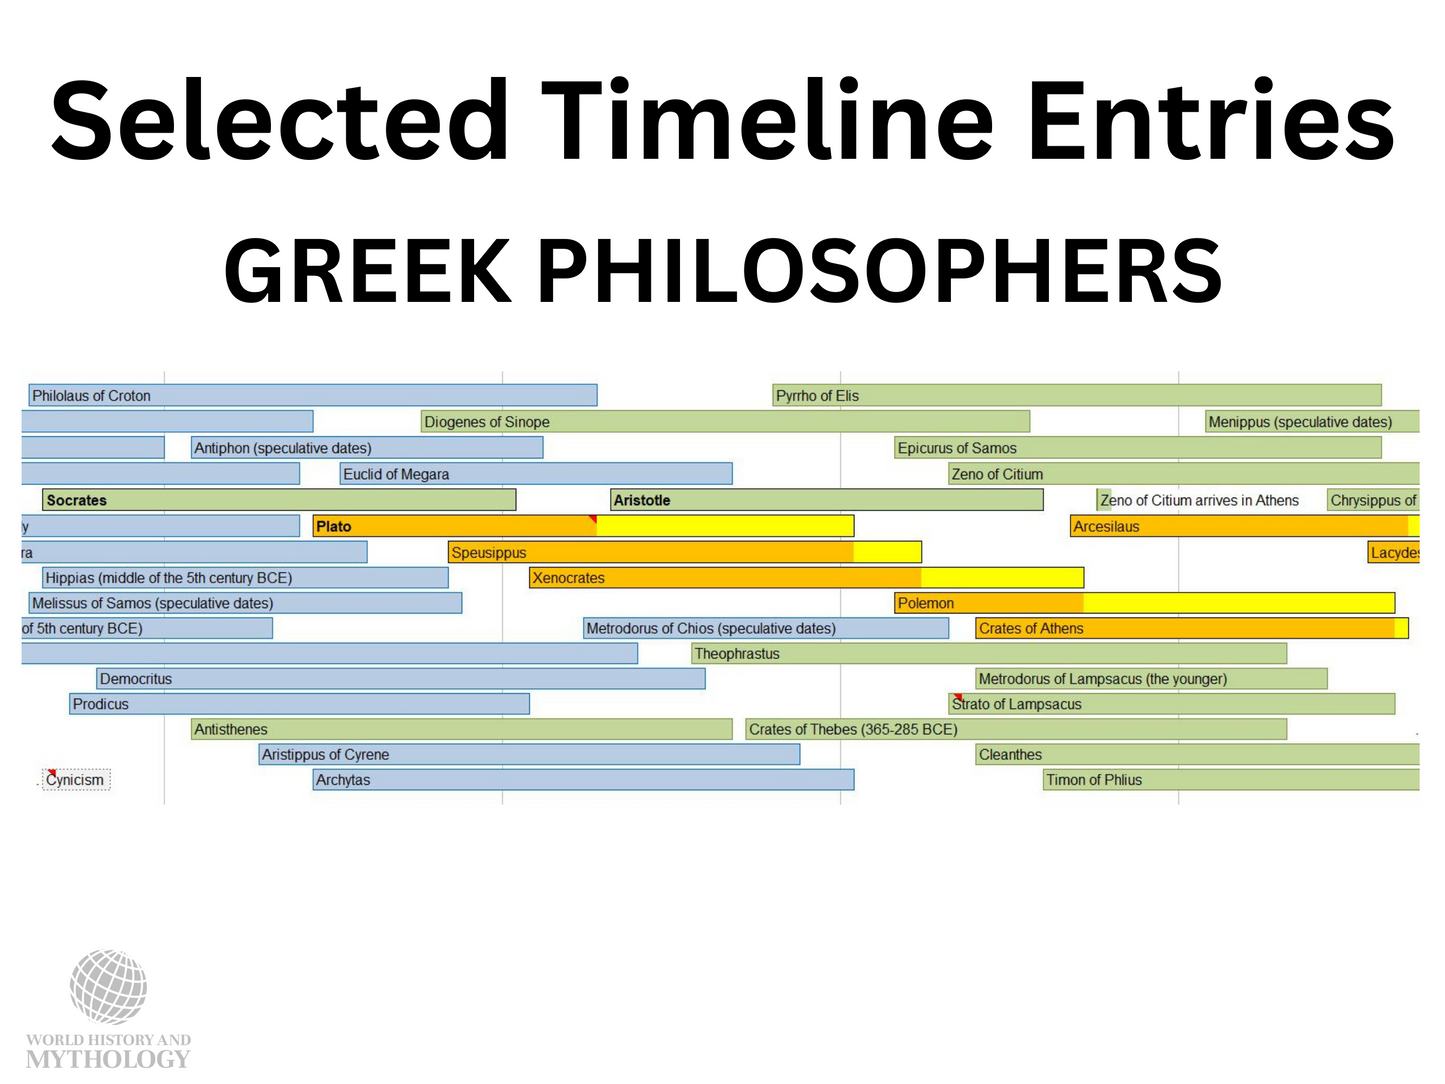 Example of a section of the Timeline of Ancient Greece and Rome showing the Greek Philosophers.